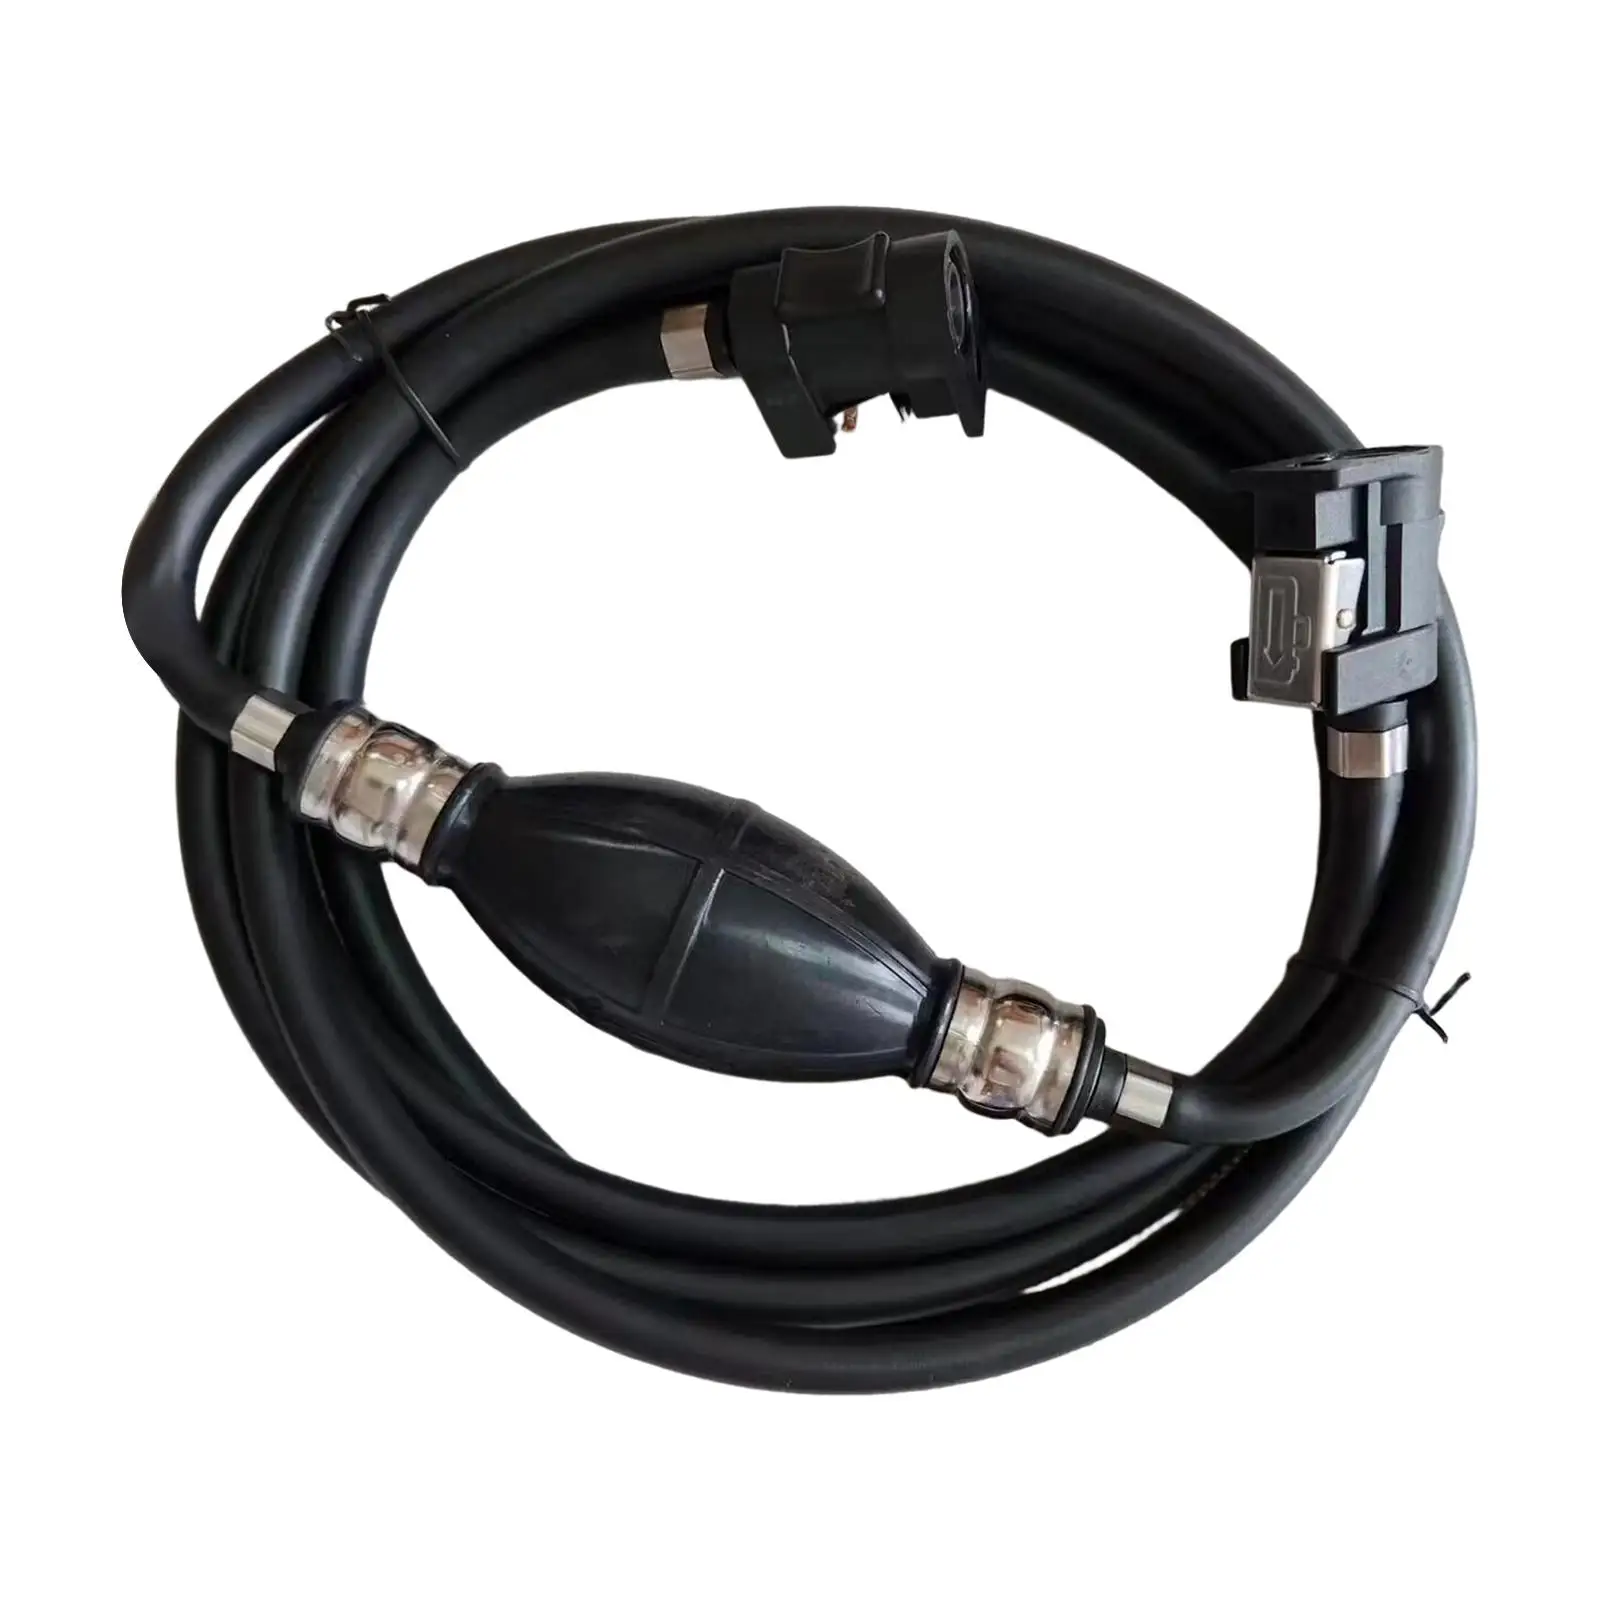 Fuel Gas Line Hose 3Meter Long Rubber Steel Hose Clamps with Primer Bulb Replace Parts for Yamaha Outboard Boat Motor